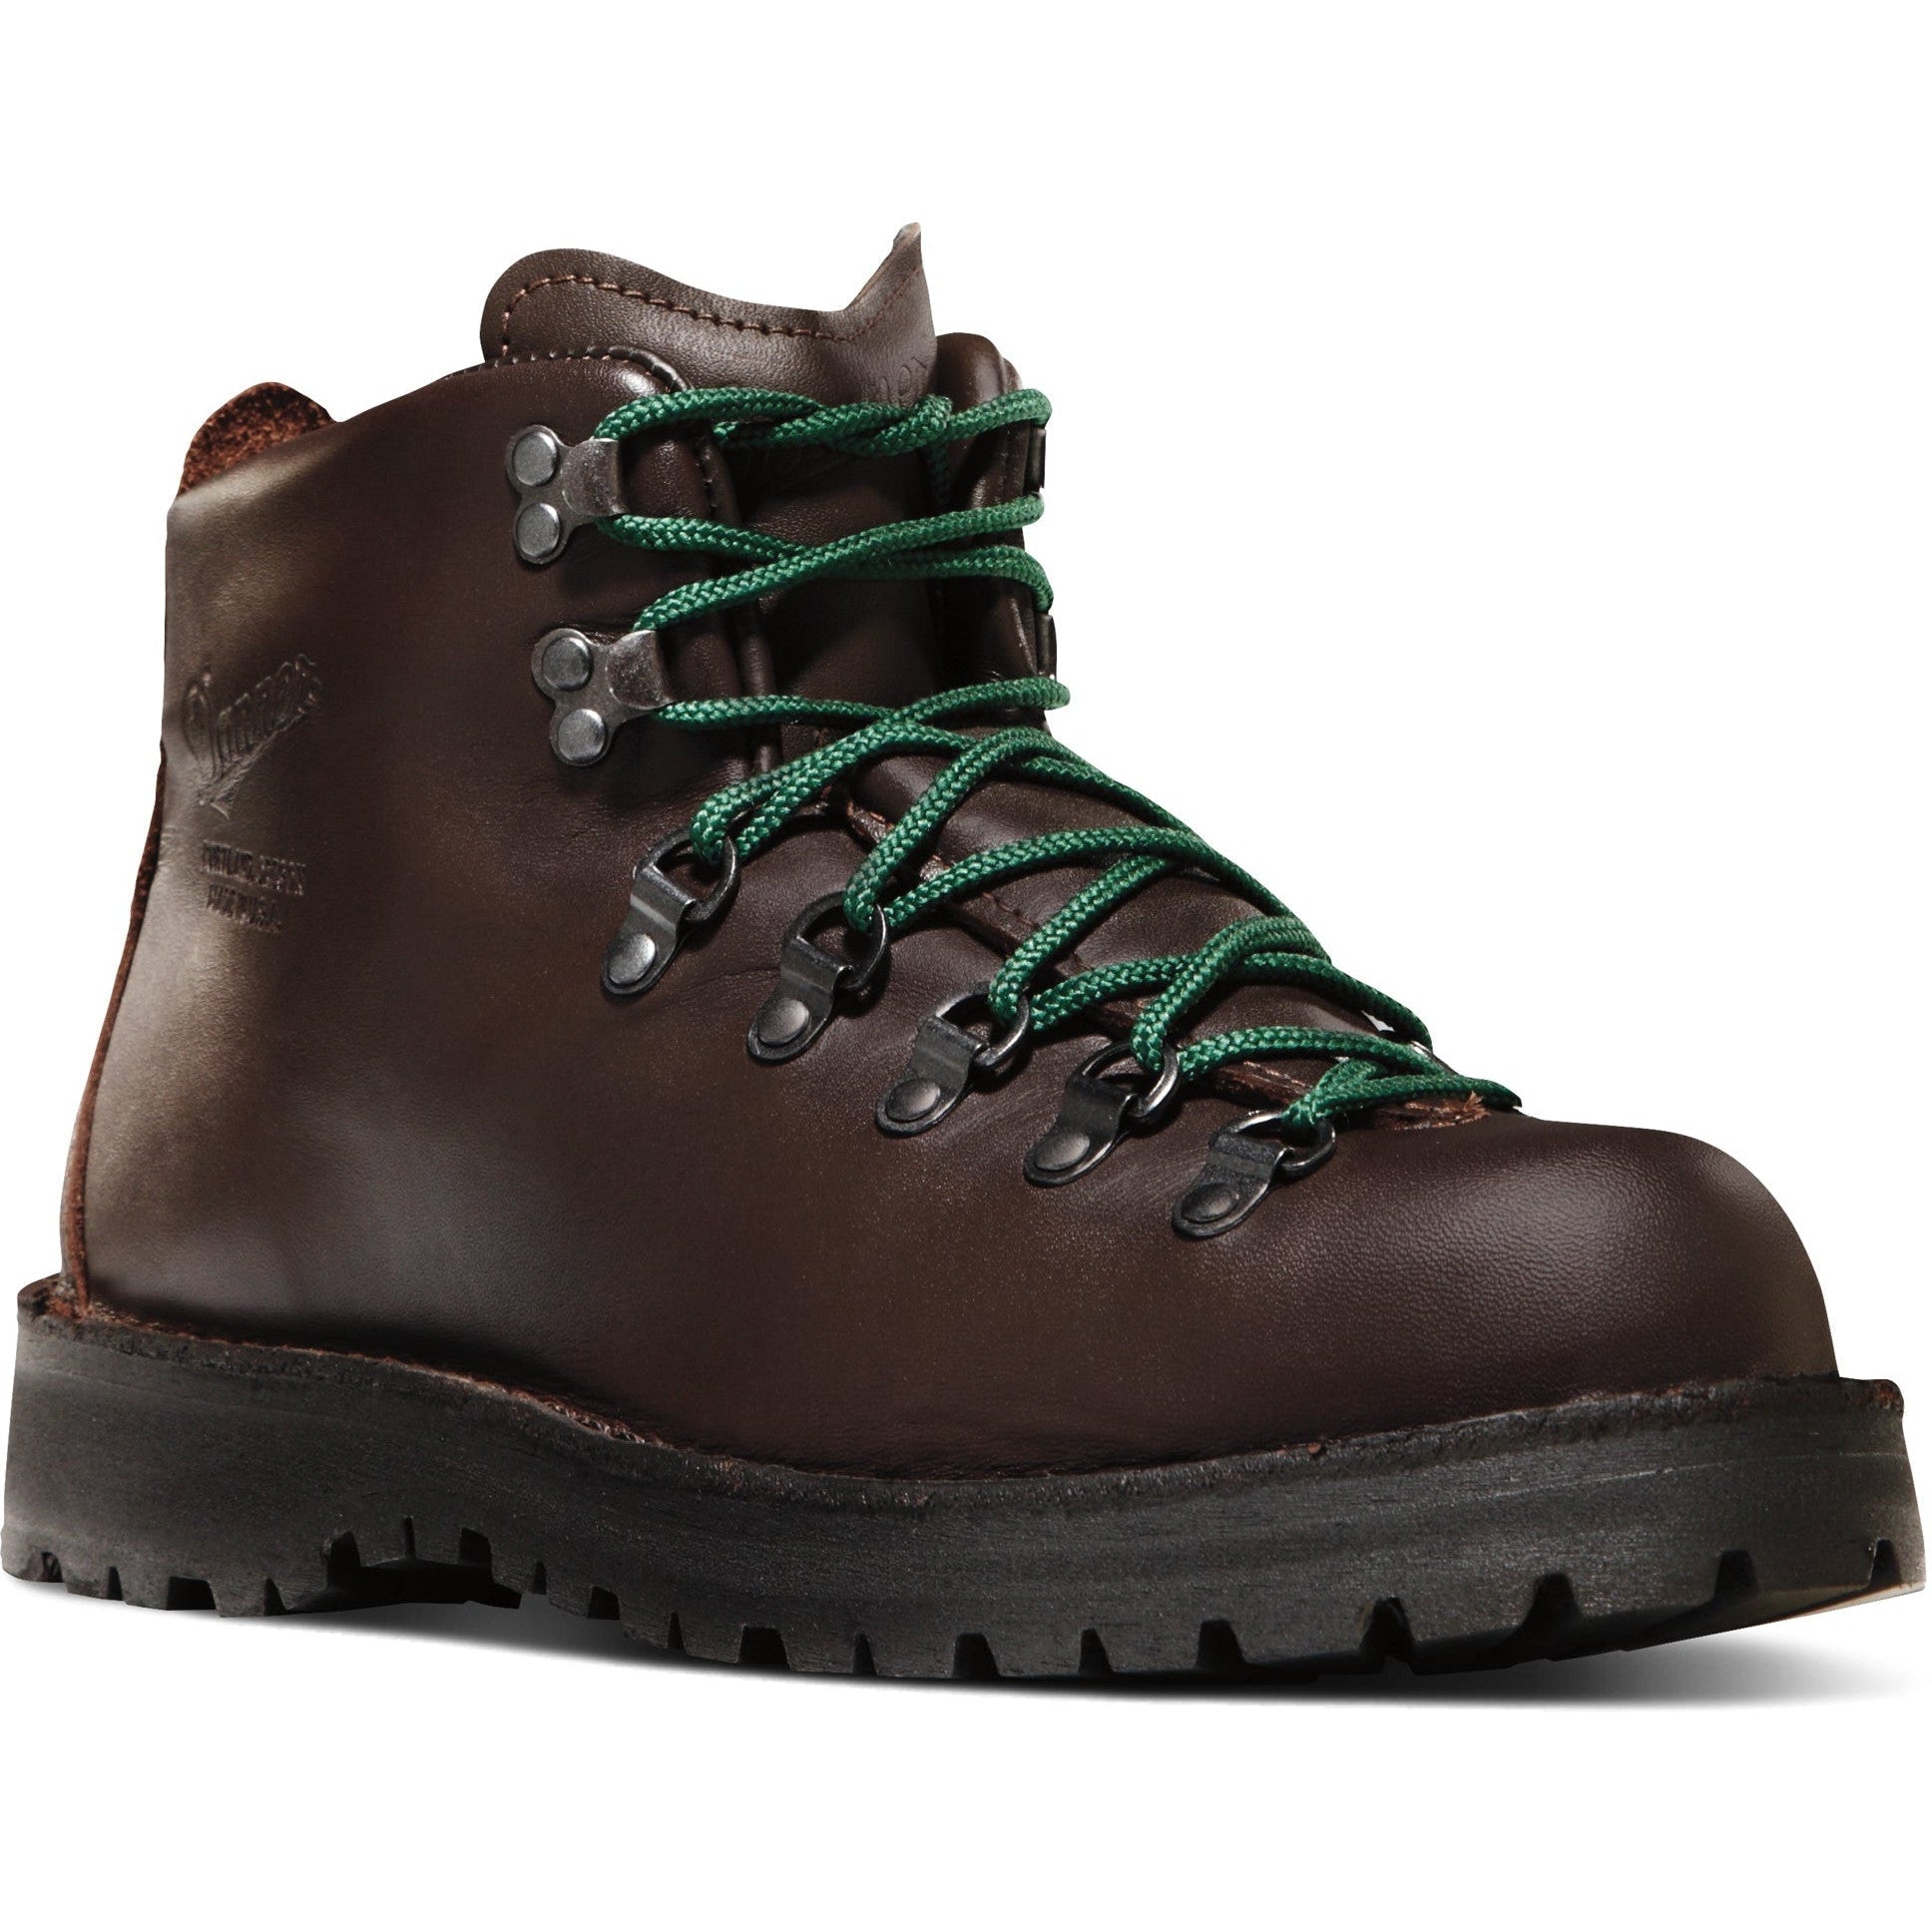 Danner Men's Mountain Light II 5" WP USA Made Hiking Boot Brown- 30800 6 / Wide / Brown - Overlook Boots